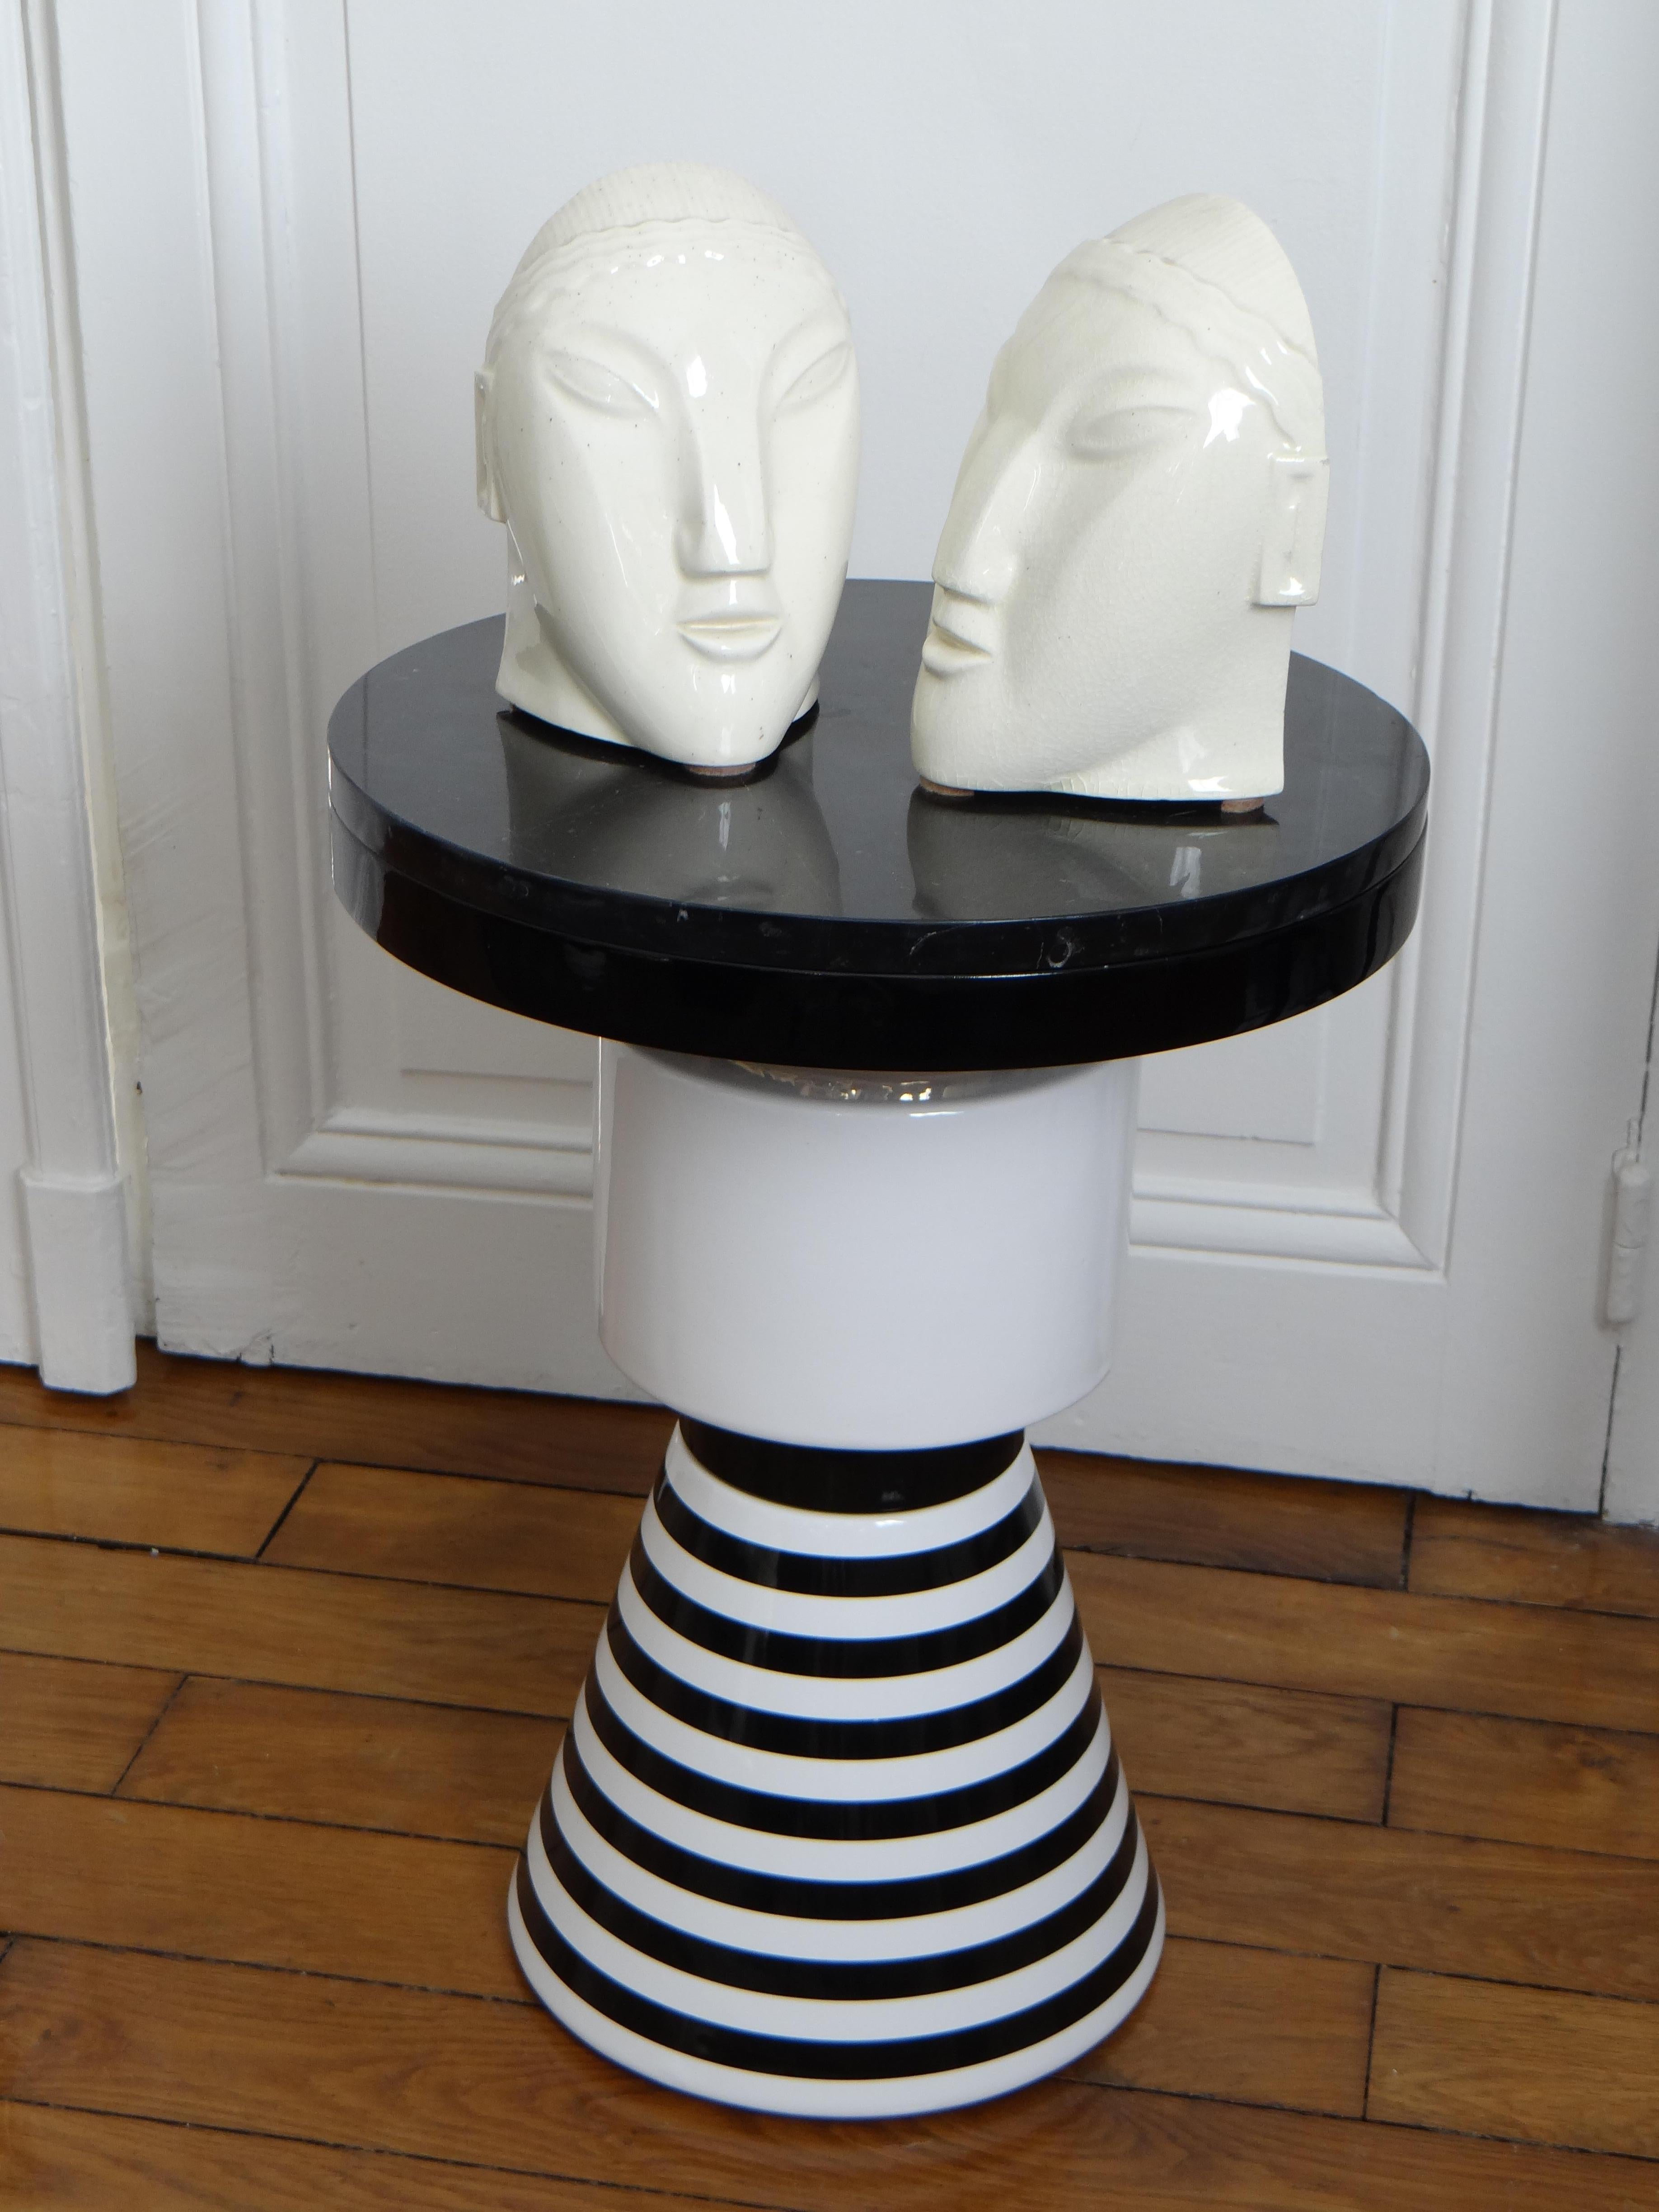 Pair of Table or Pedestal Table, Contemporary Creation on Ceramic, 2018 1